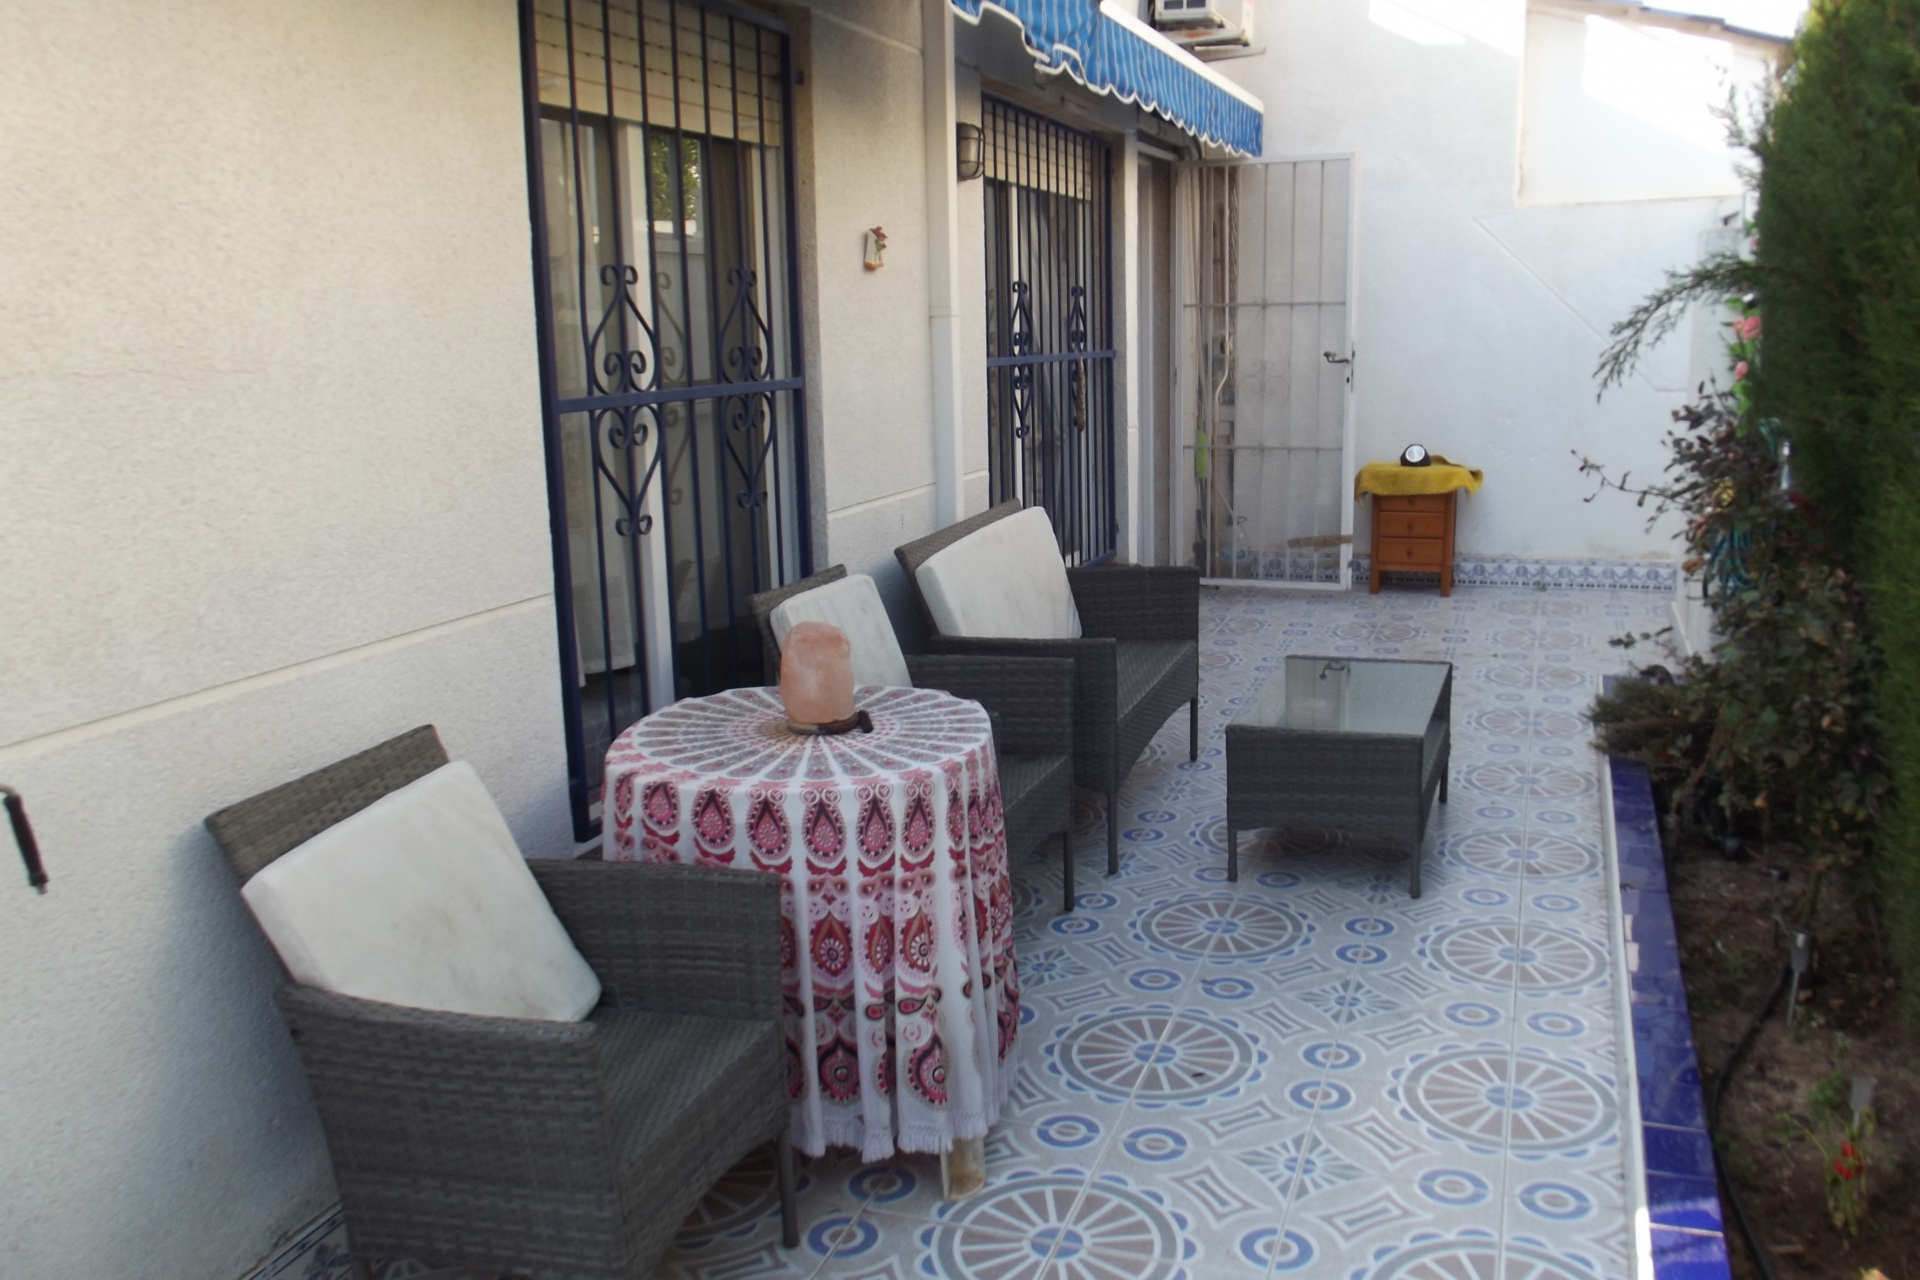 Property Sold - Bungalow for sale - Torrevieja - Torrevieja Town Centre